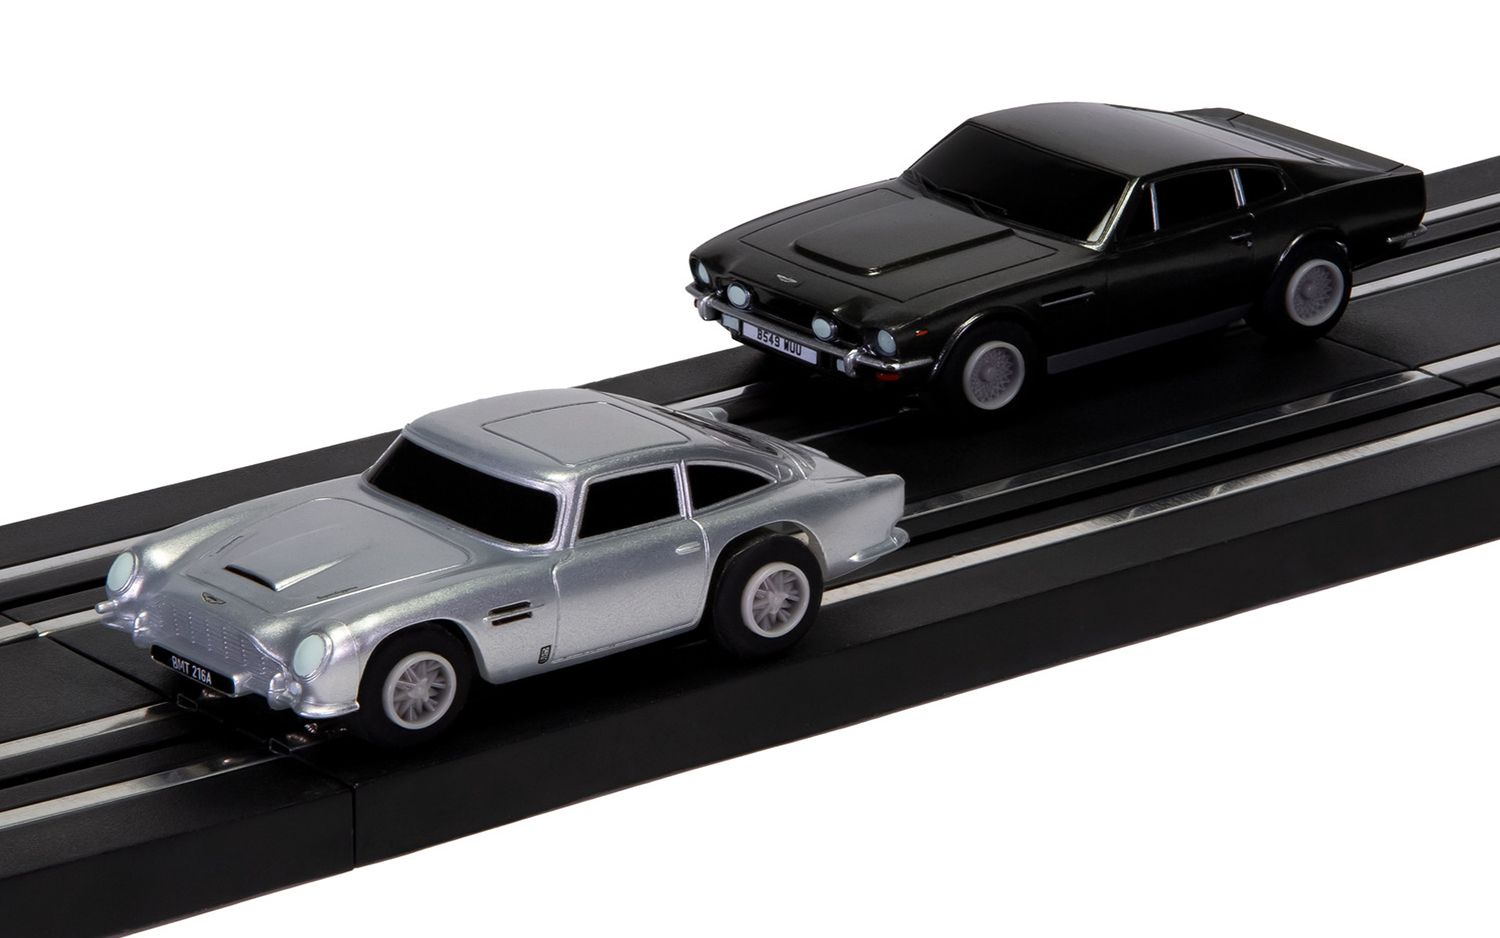 James Bond DB5 and V8 Micro Scalextric Race Set